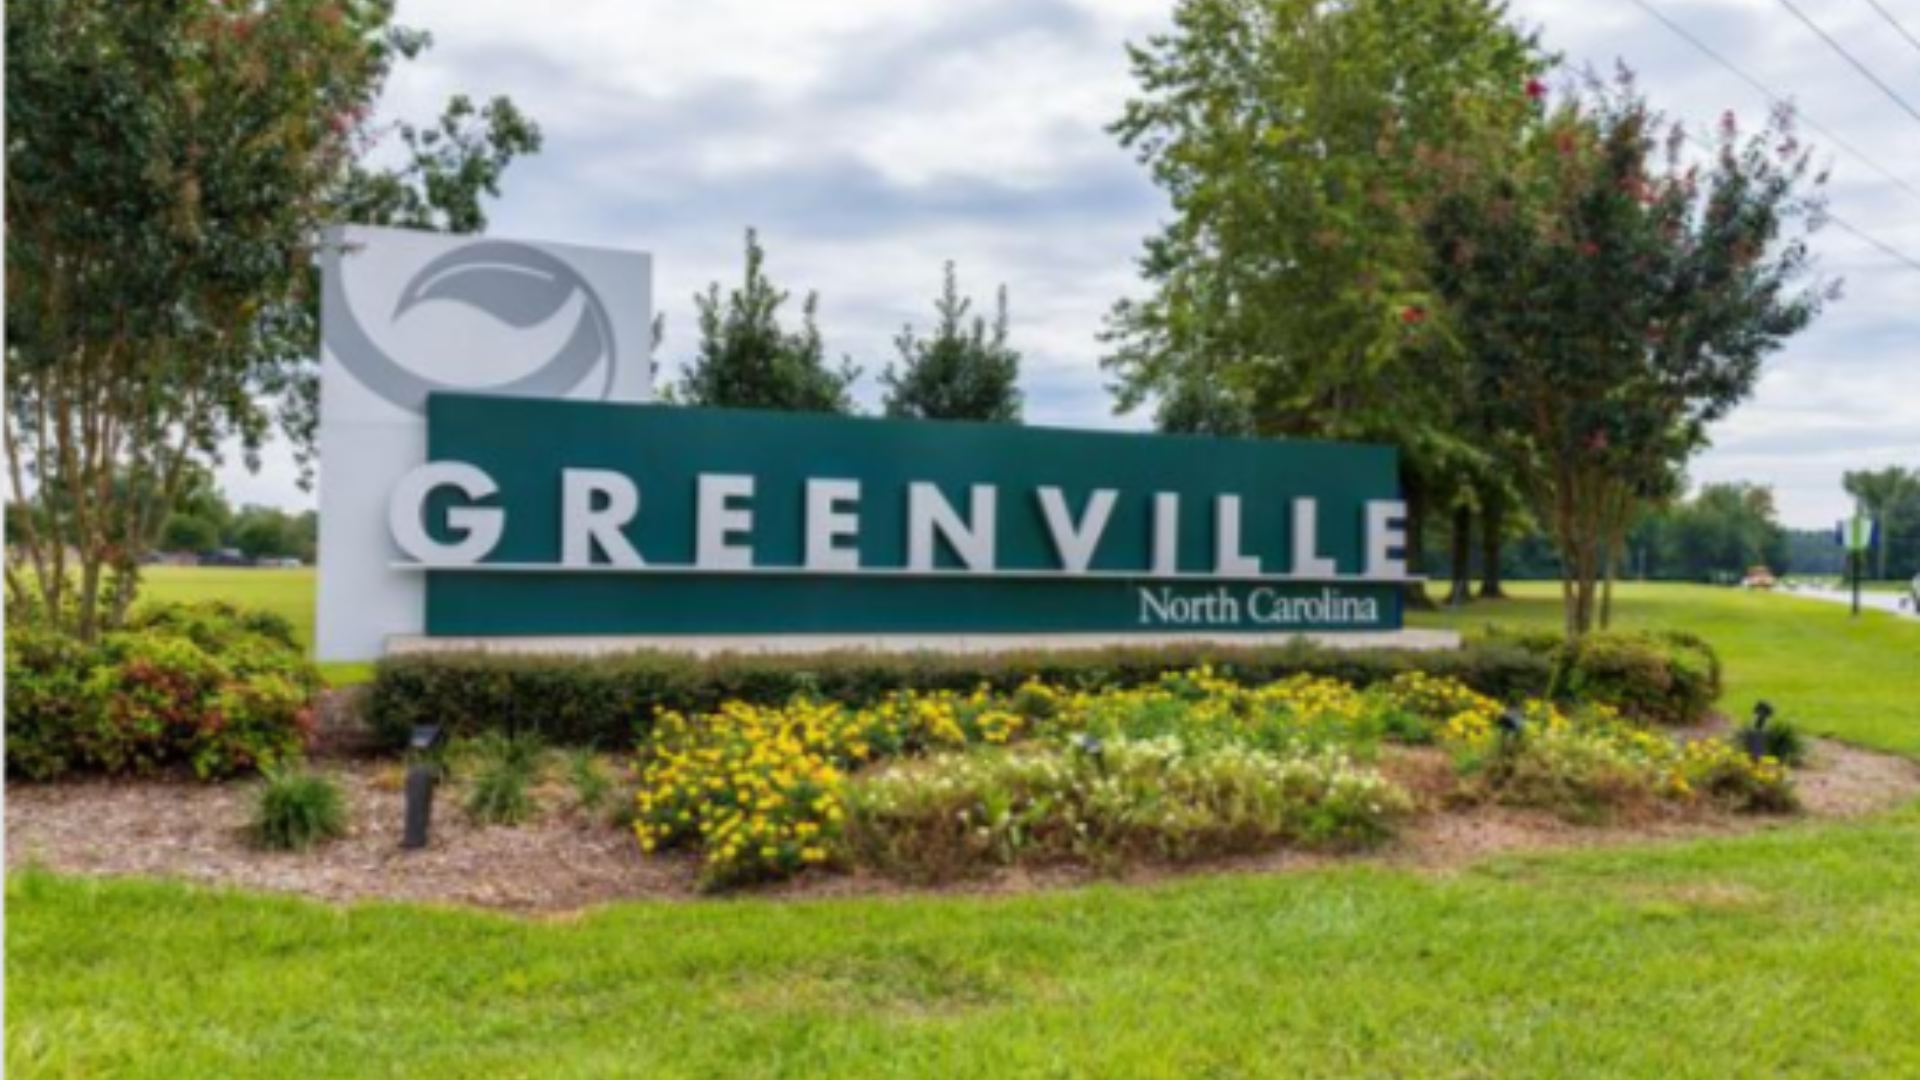 Top 10 things to do in Greenville NC for Couples